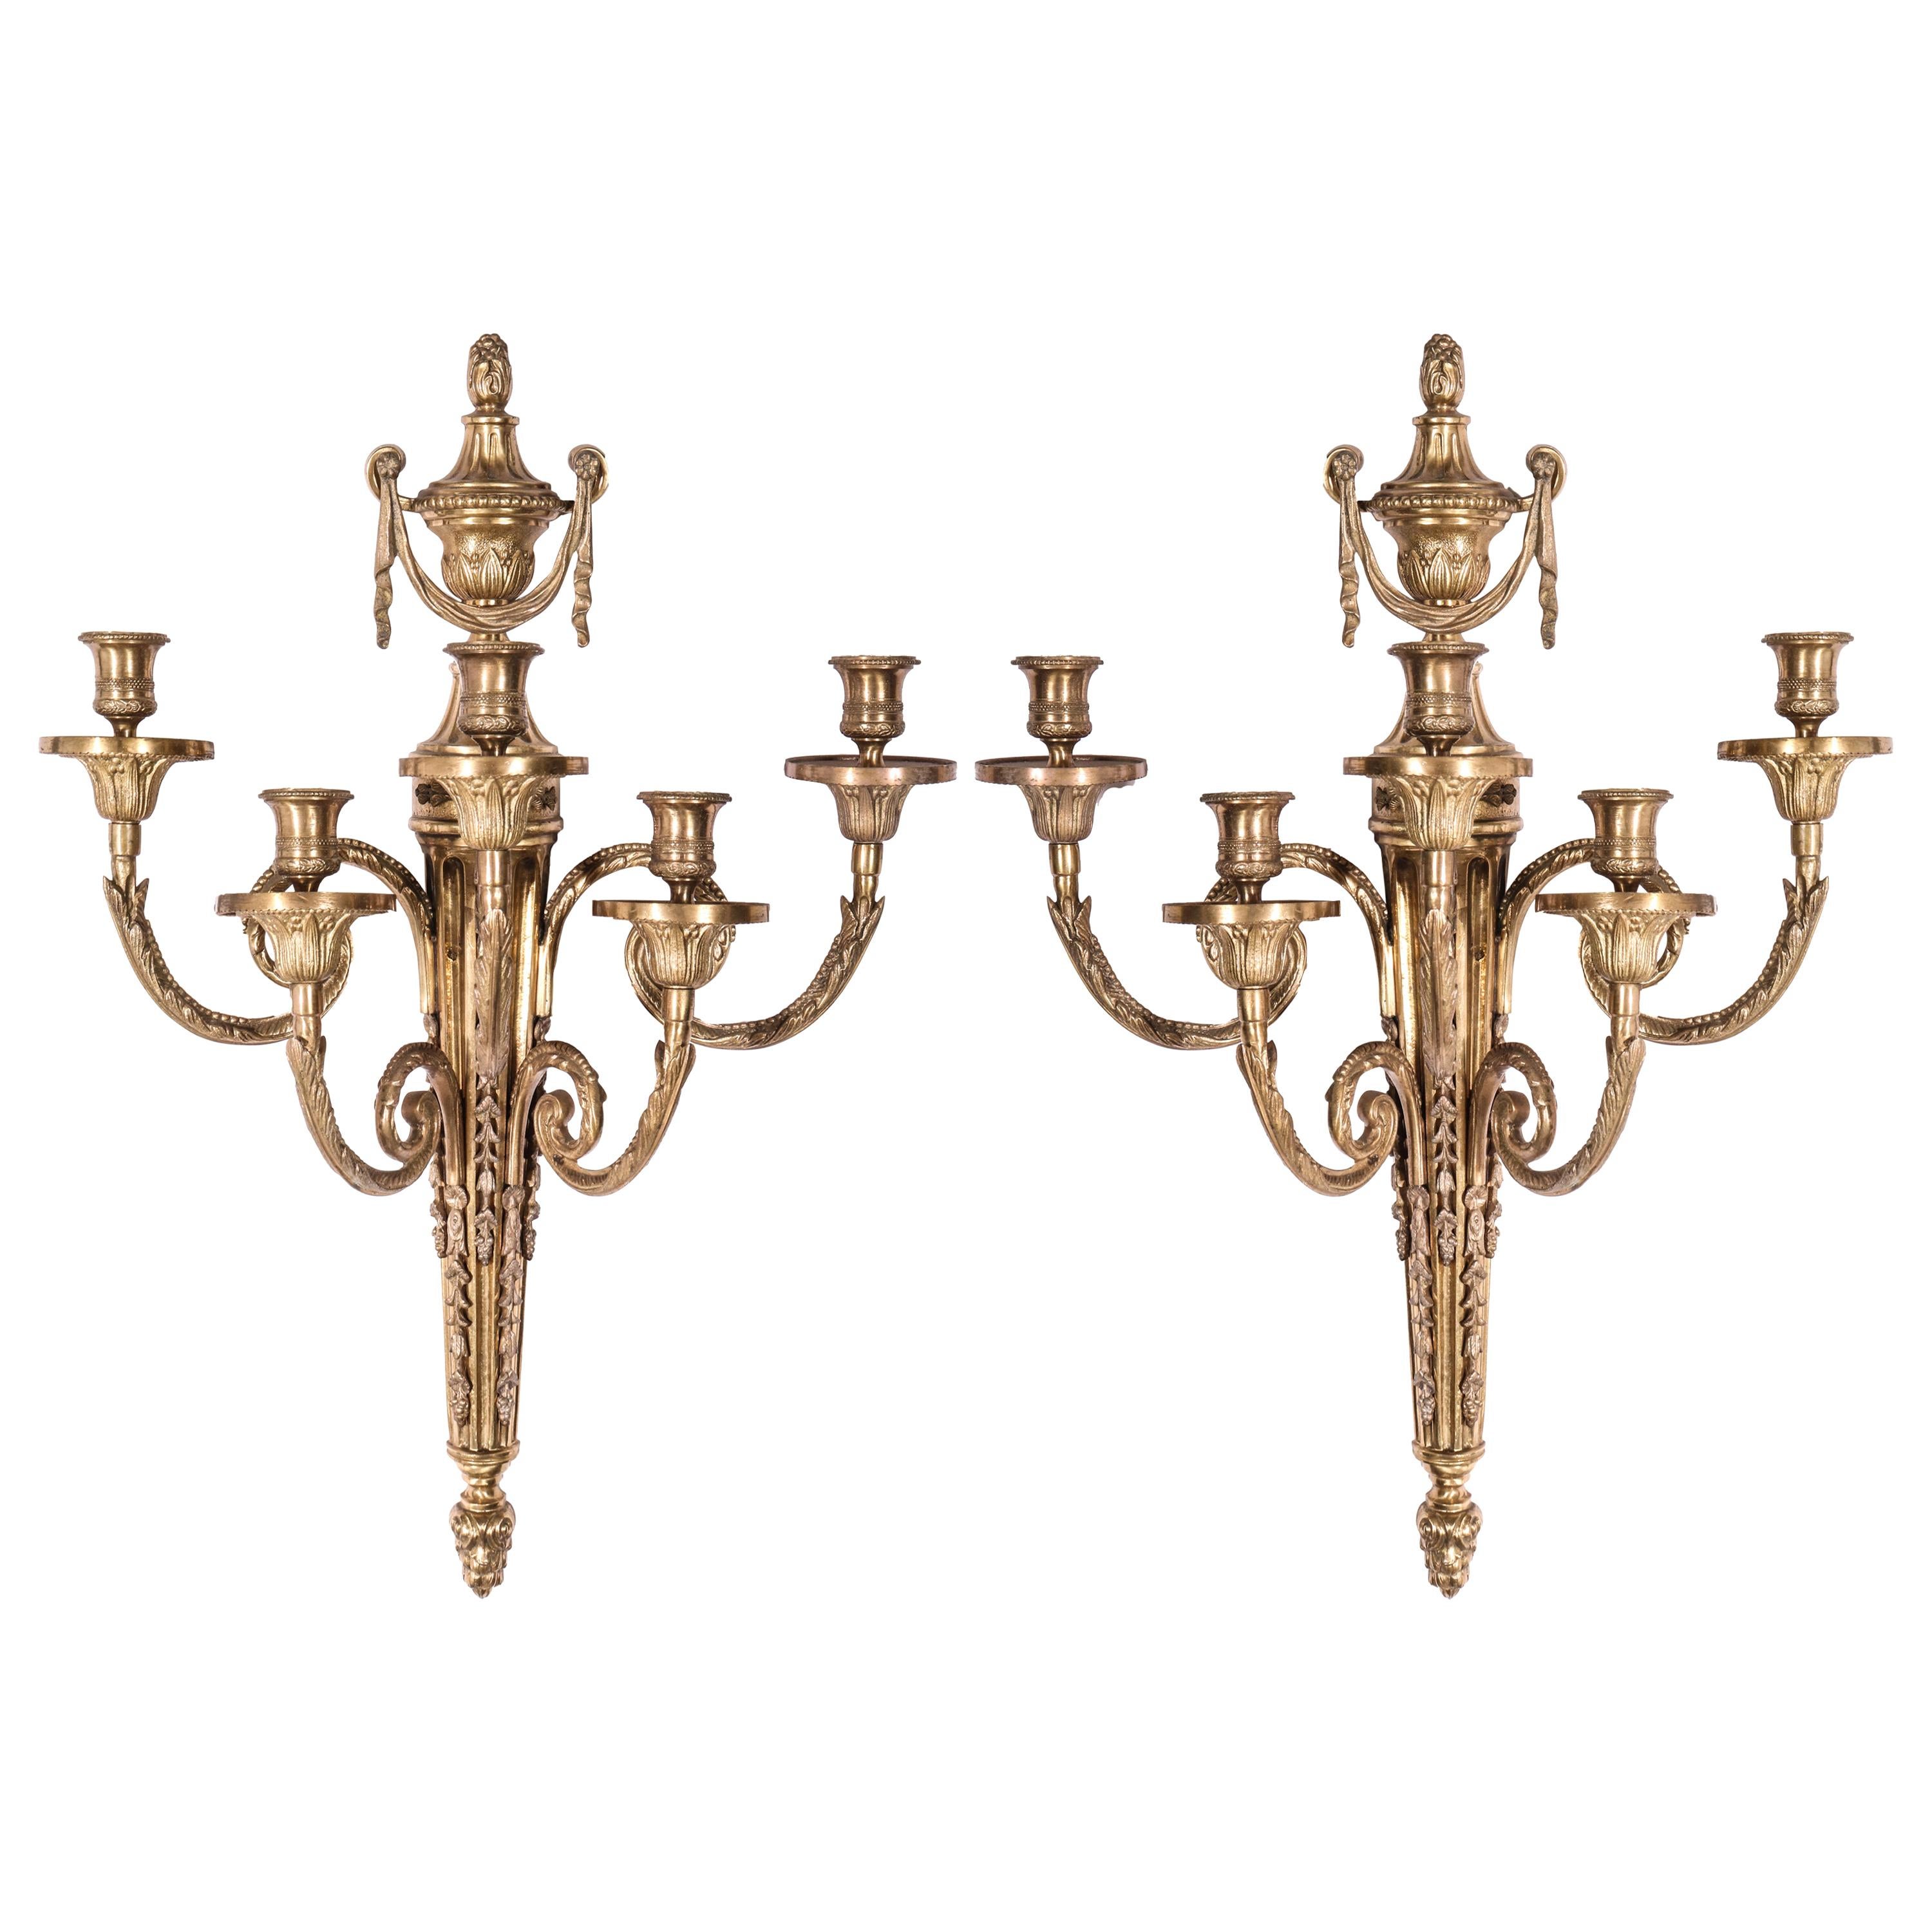 Italian neoclassical style pair of gilt bronze sconces with five branches. The pair is decorated with a flame finial topped acanthus wrapped urn, tassels and fluting. Marked with made in Italy tag on the back. In great vintage condition with